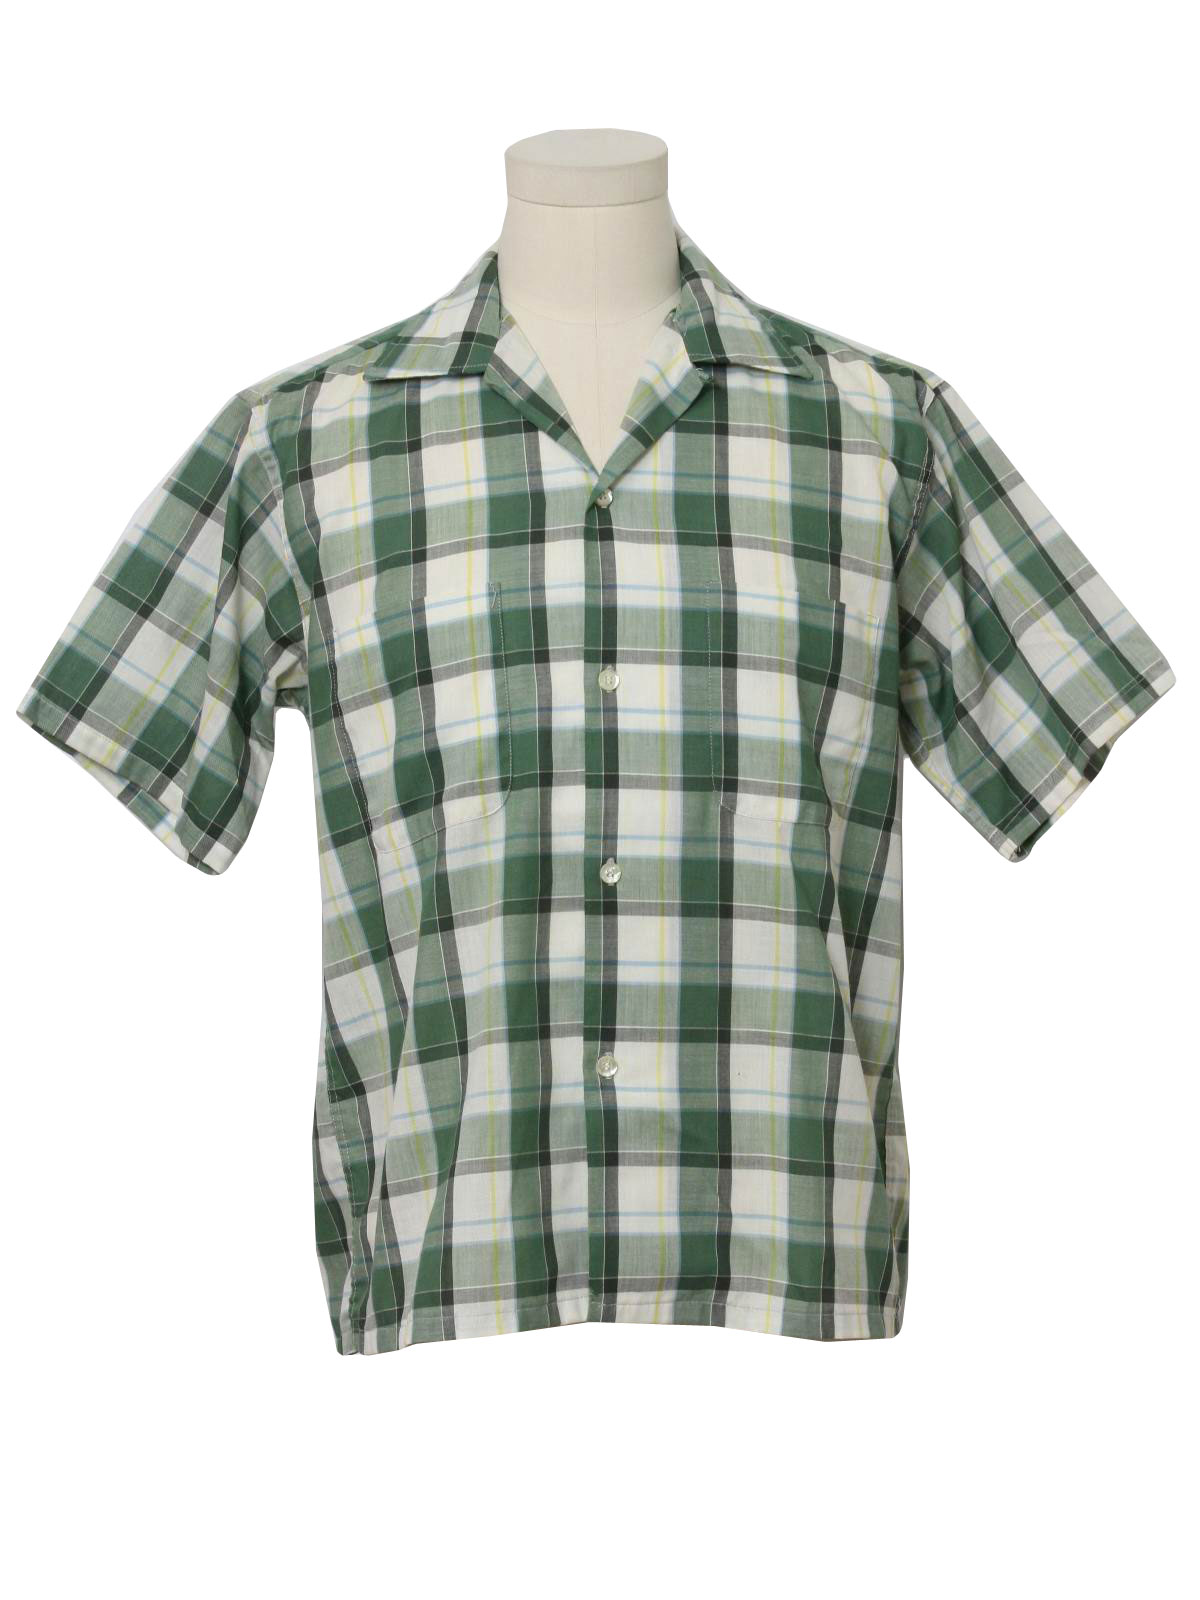 Retro Sixties Shirt: Early 60s -Towncraft- Mens shaded green, off white ...